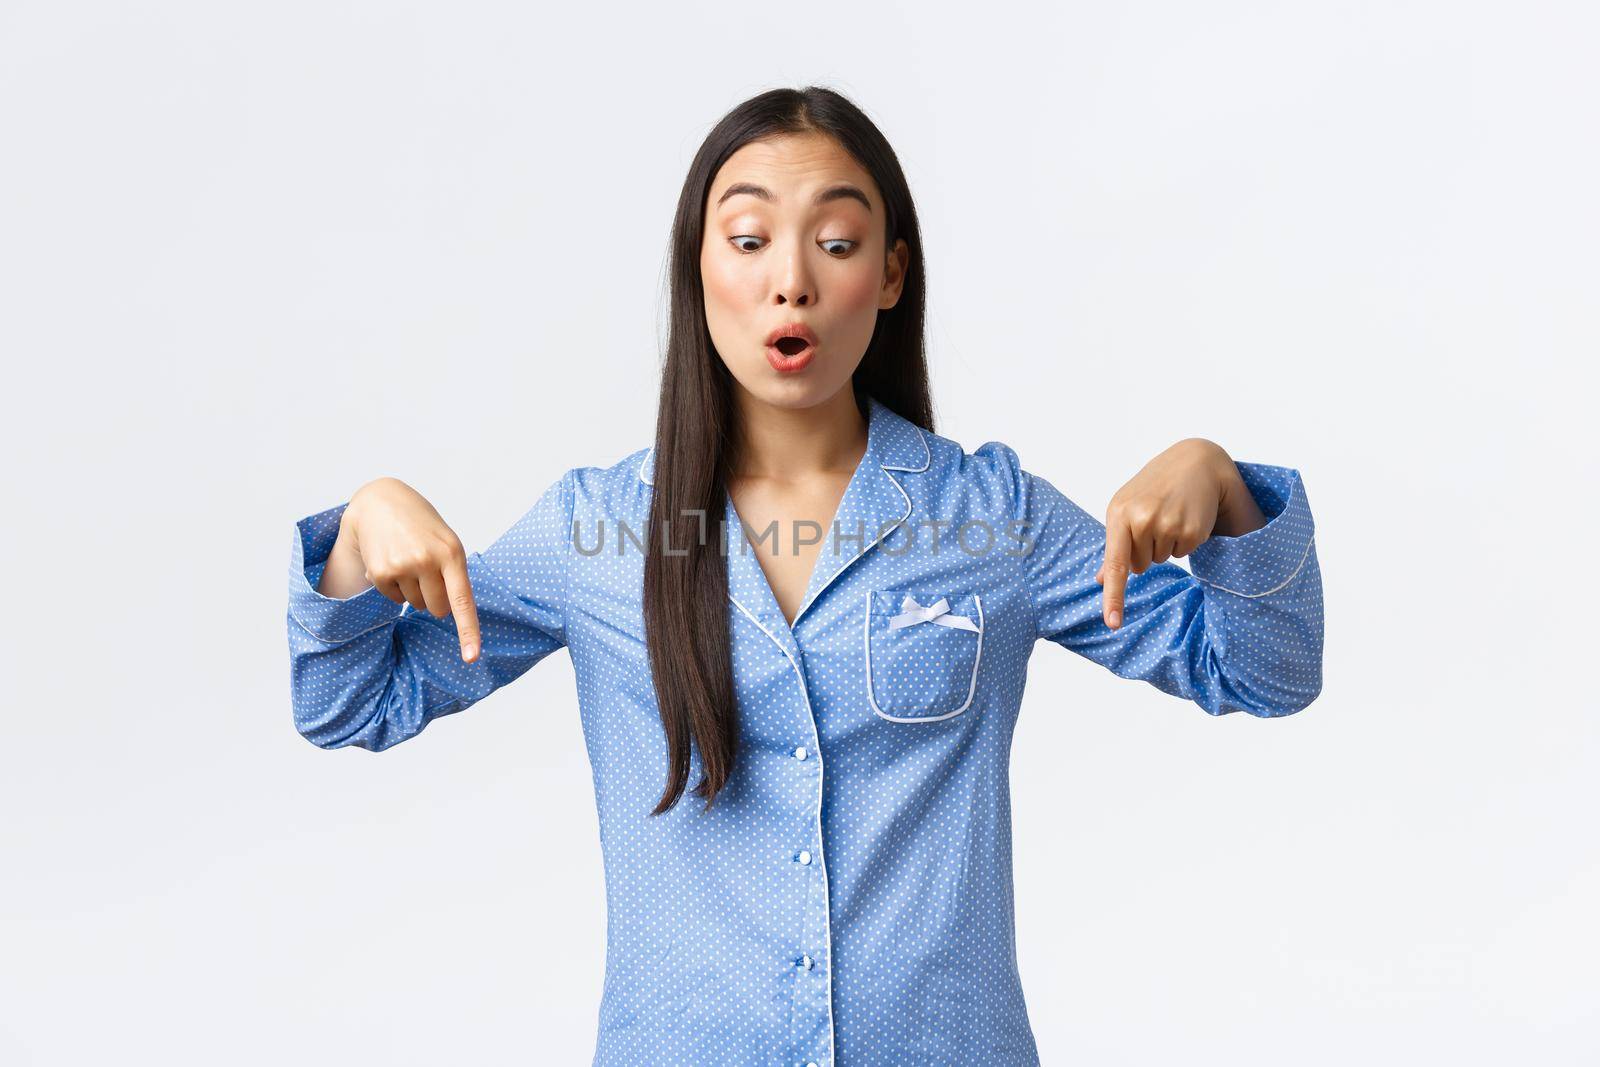 Impressed gasping asian girl stare and pointing fingers down, looking with interest at promo. Woman in pajamas during sleepover party spot awesome interesting thing, white background.